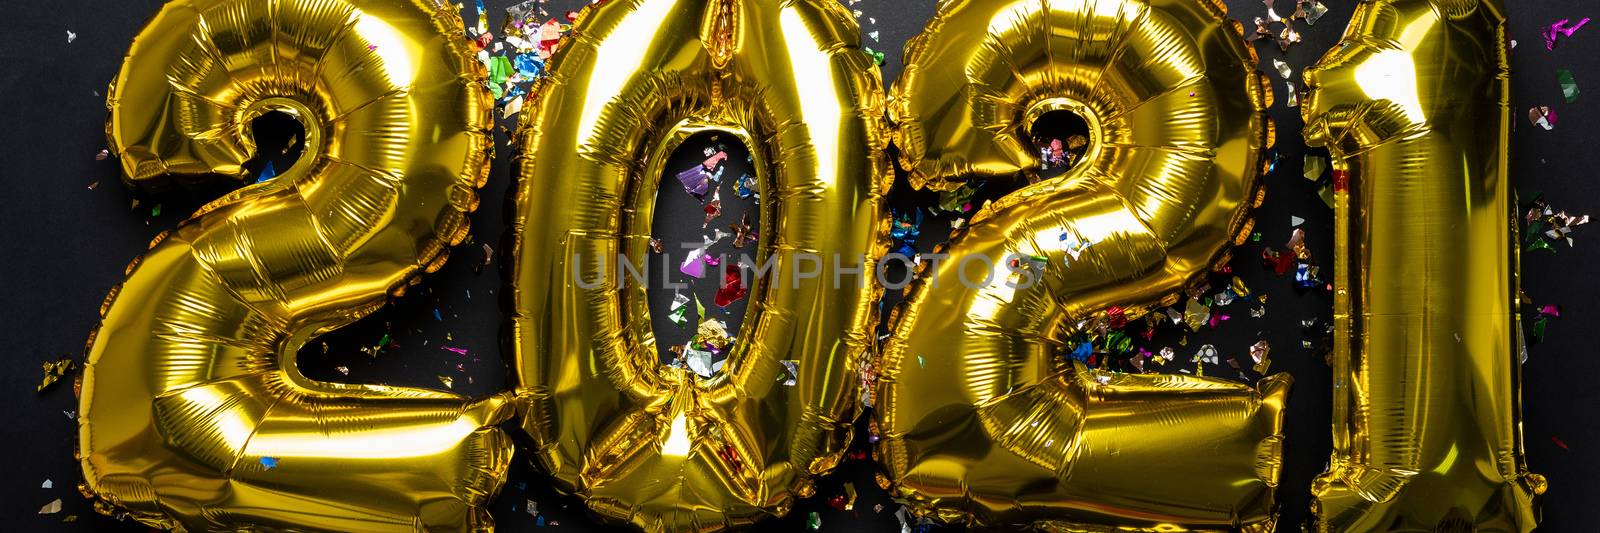 2021 new year numbers from golden foil balloon and confetti by adamr